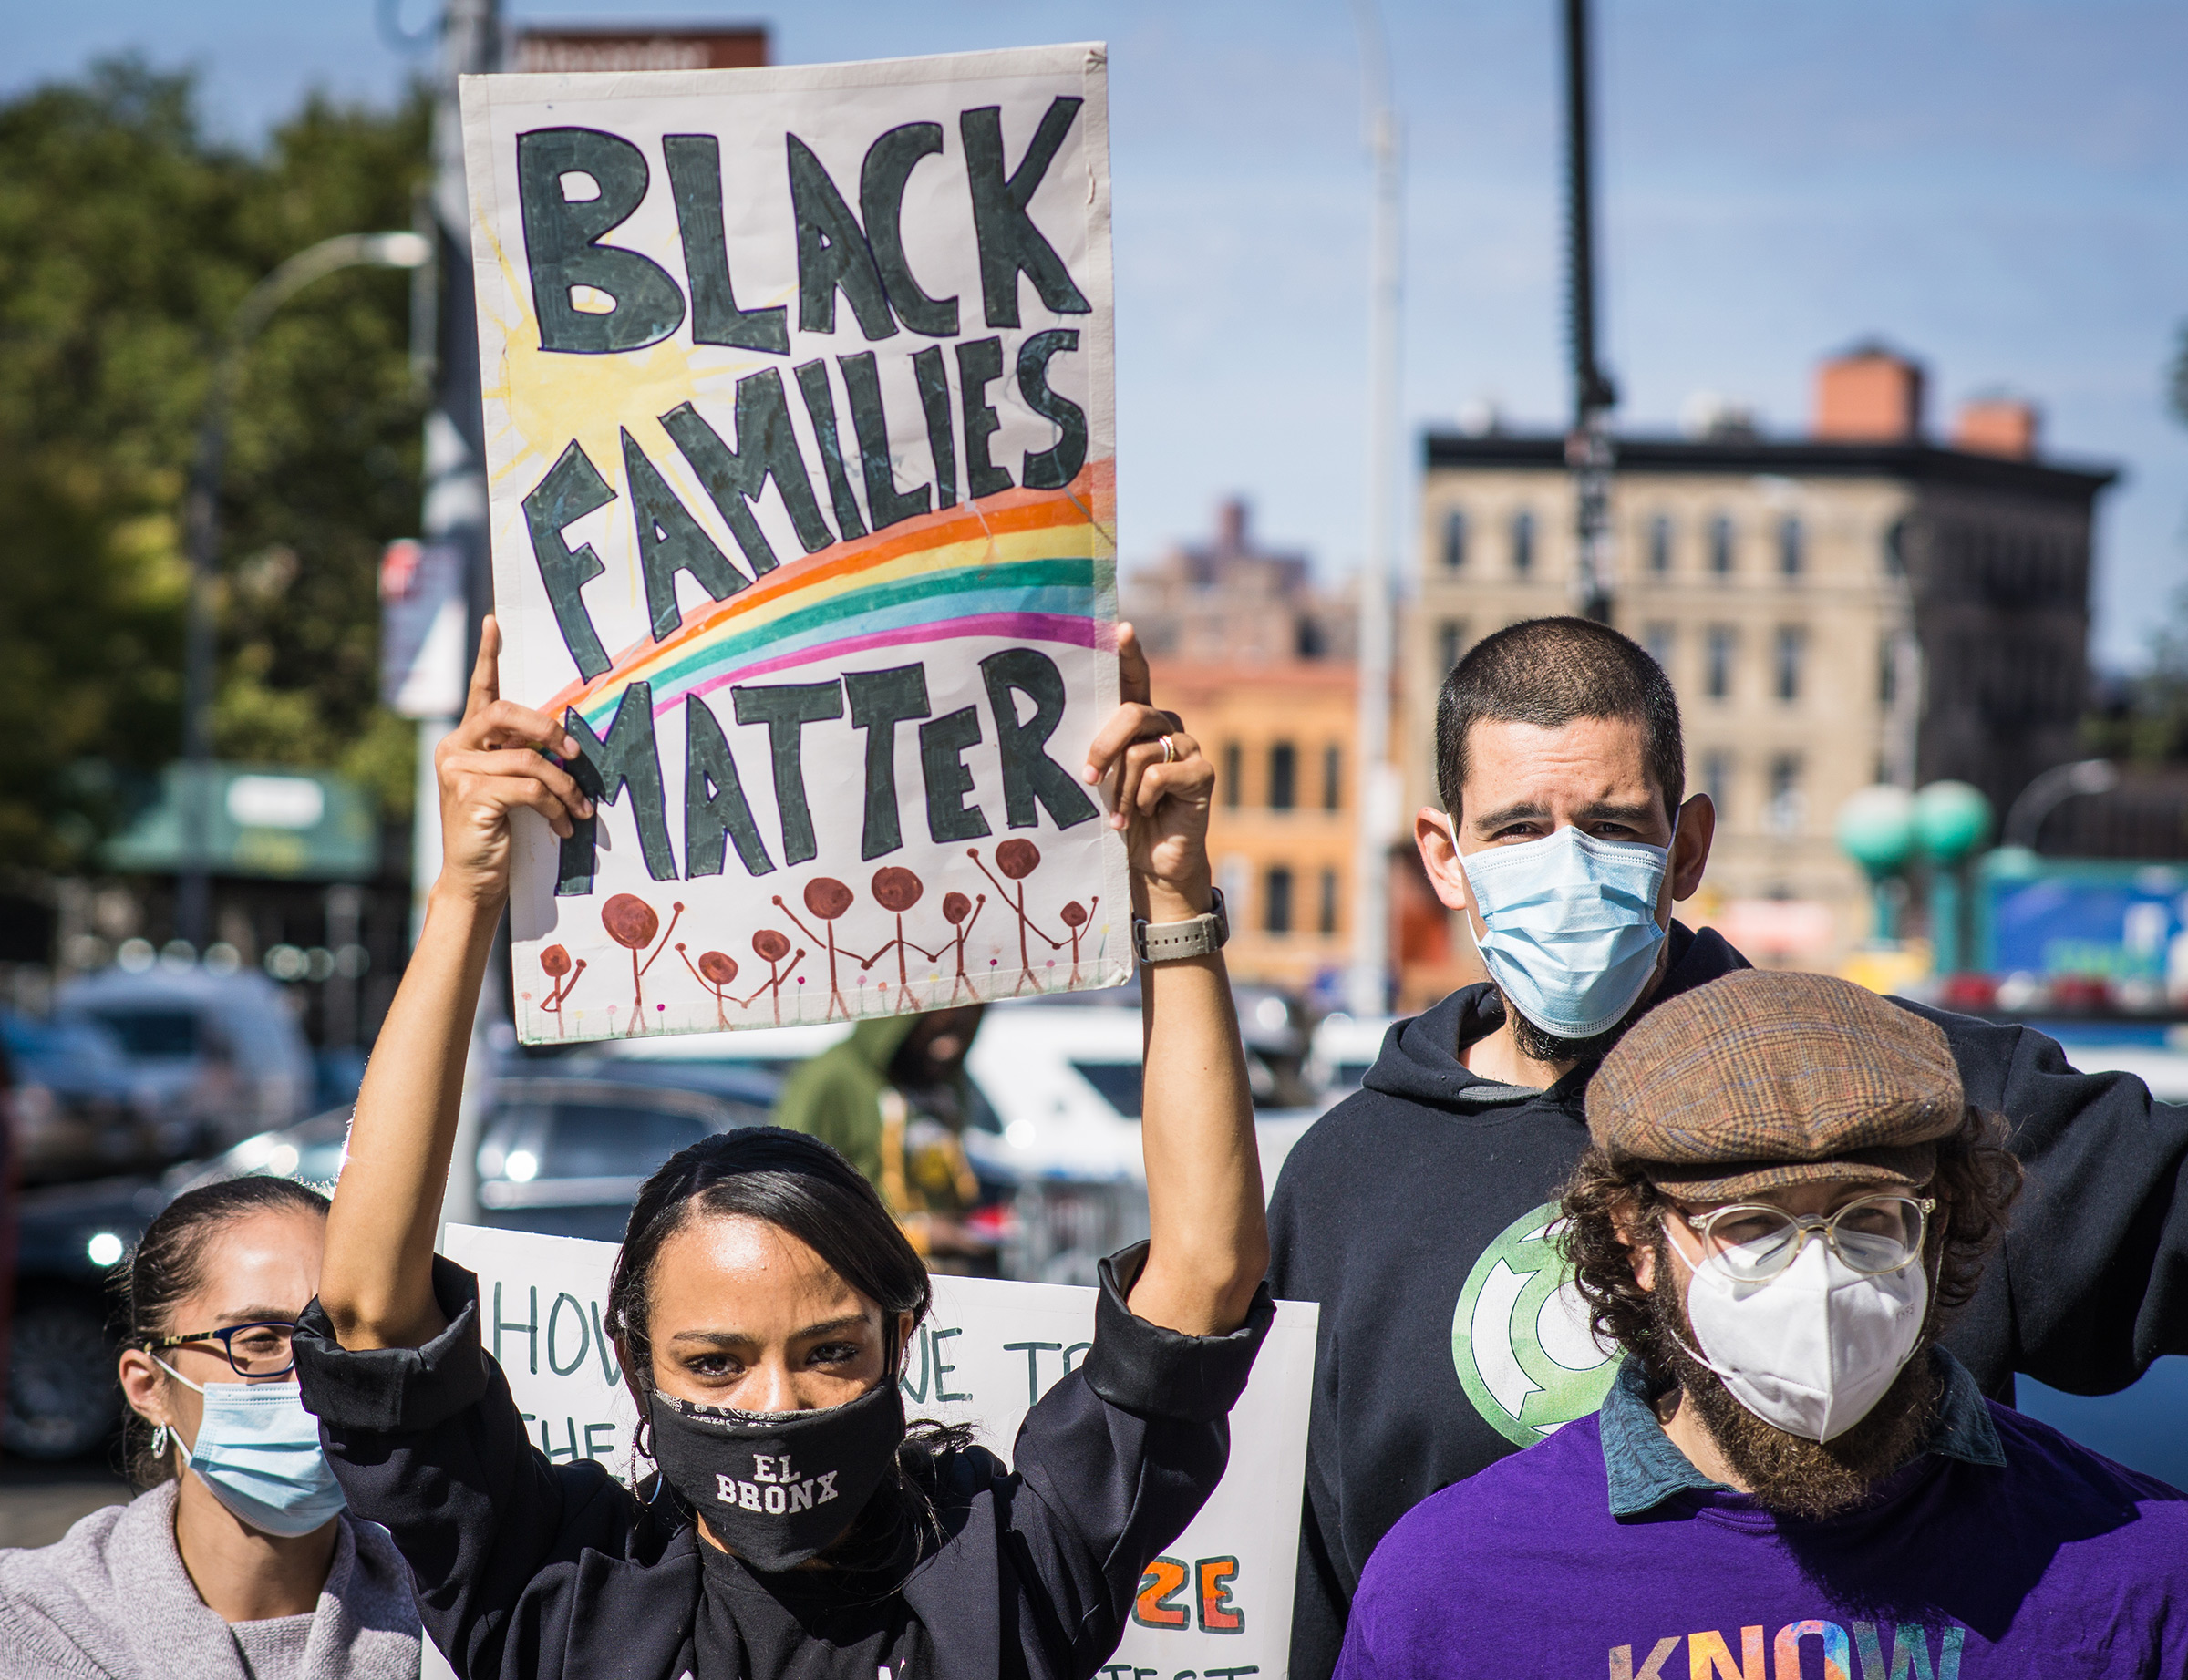 Residents and members of Mott Haven Families protest outside the precinct in the Bronx, New York, on Oct. 4, 2020. (Steve Sanchez—Pacific Press/Sipa USA)